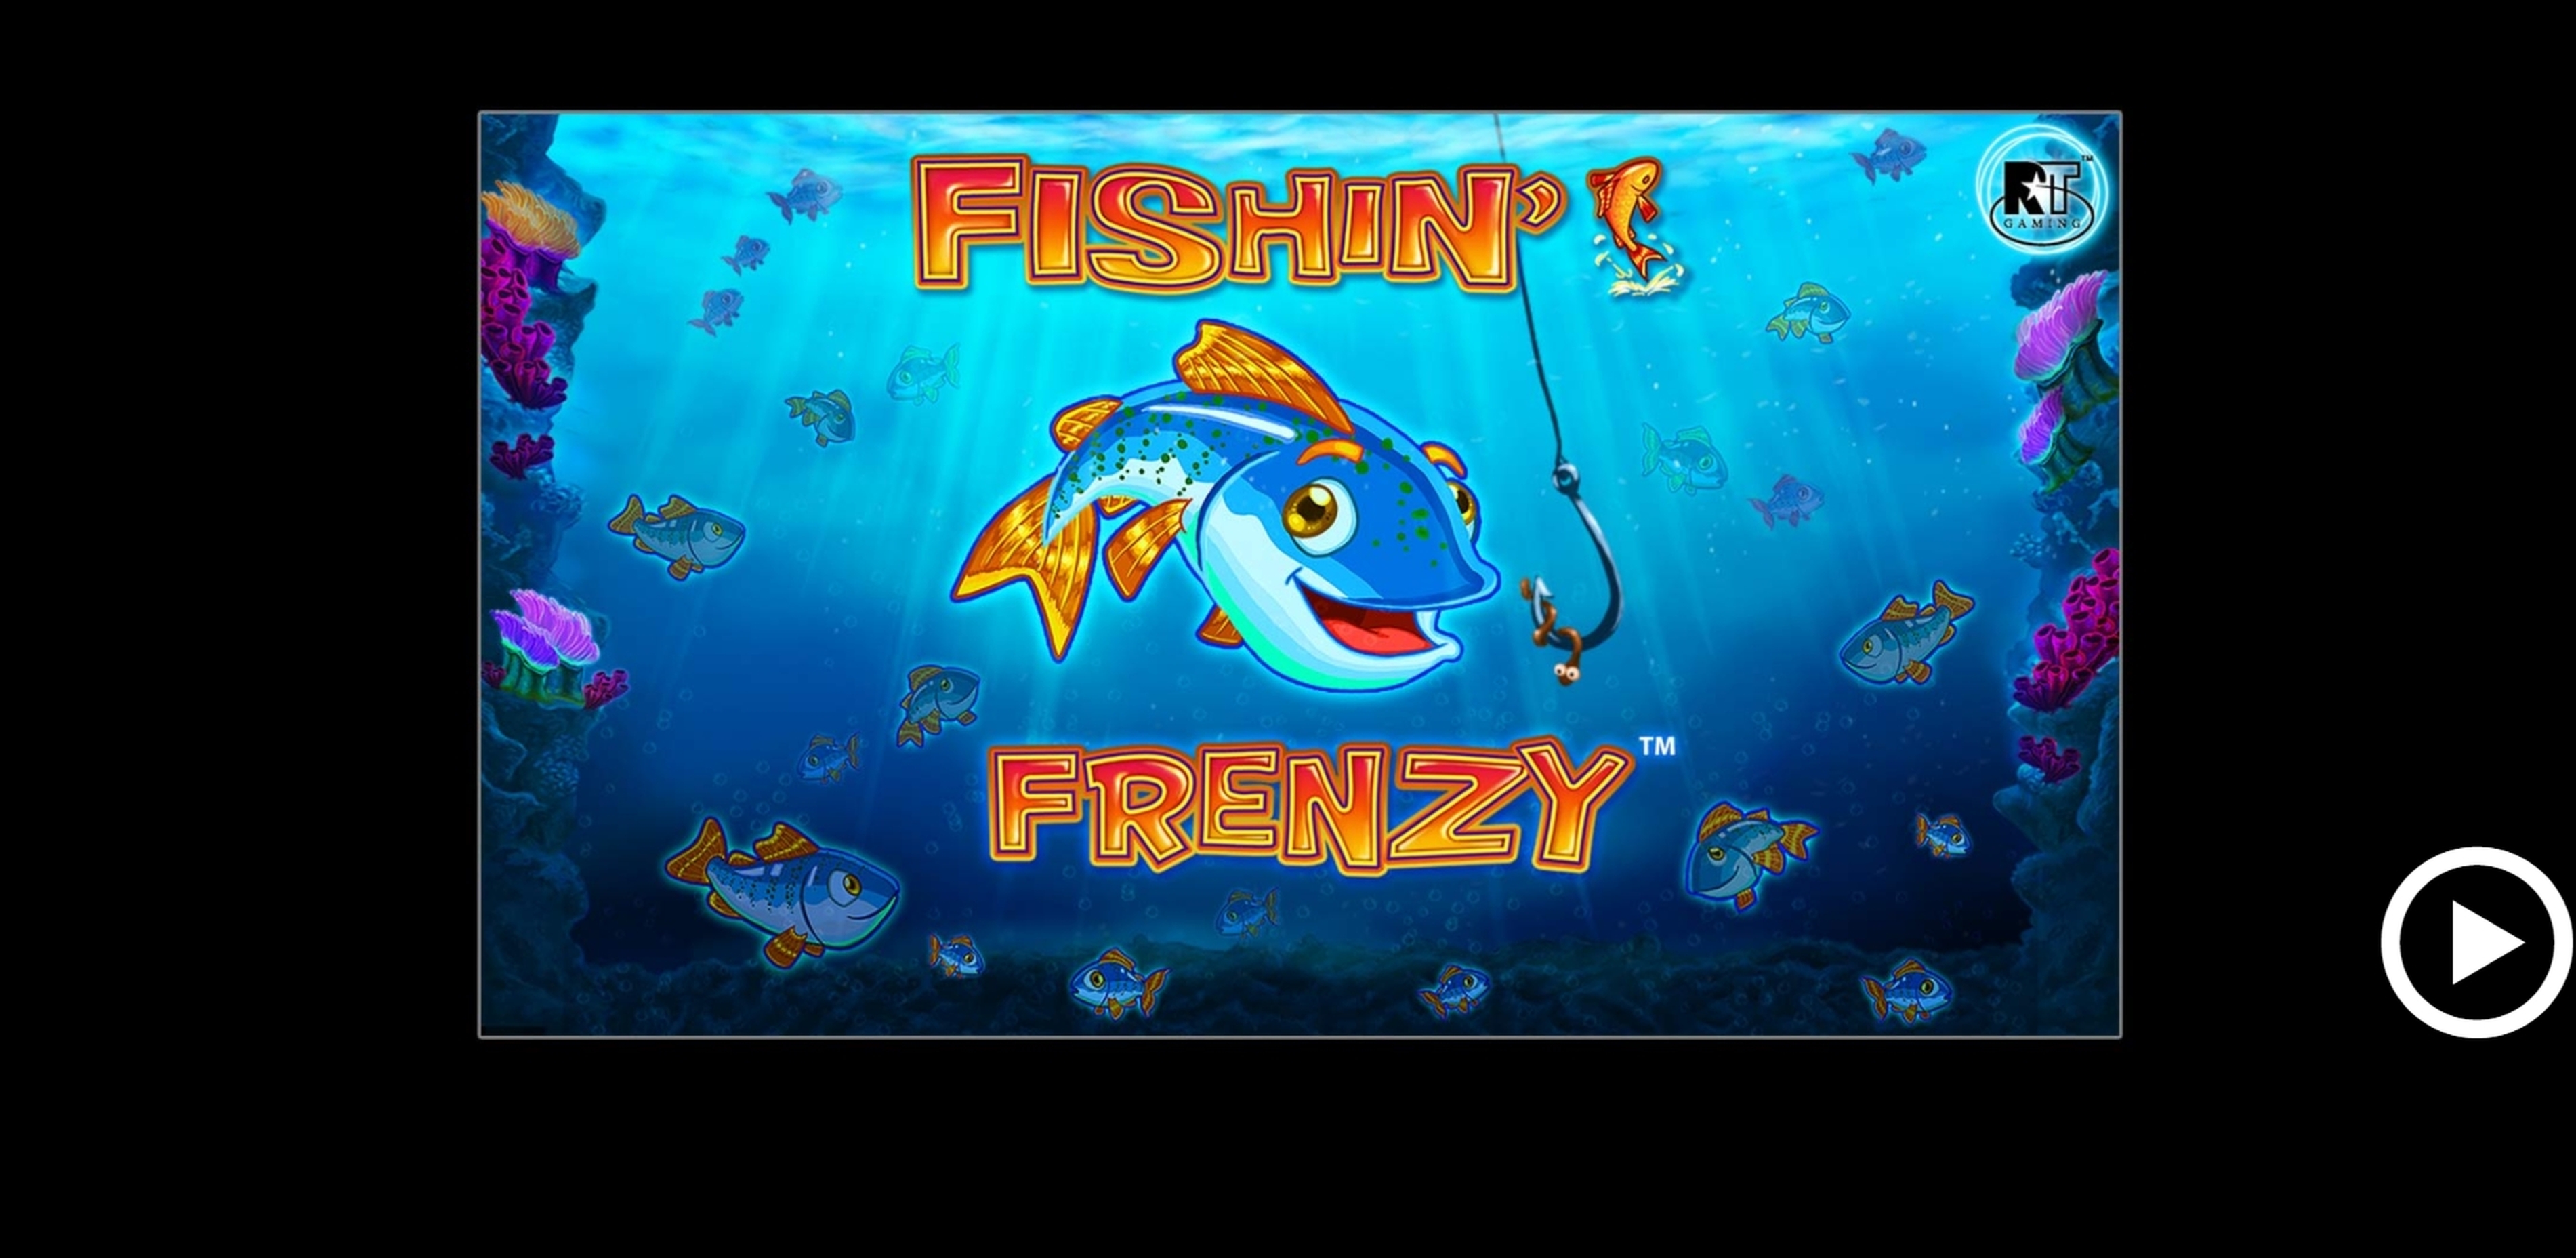 Play Fishin' Frenzy Free Casino Slot Game by Reel Time Gaming